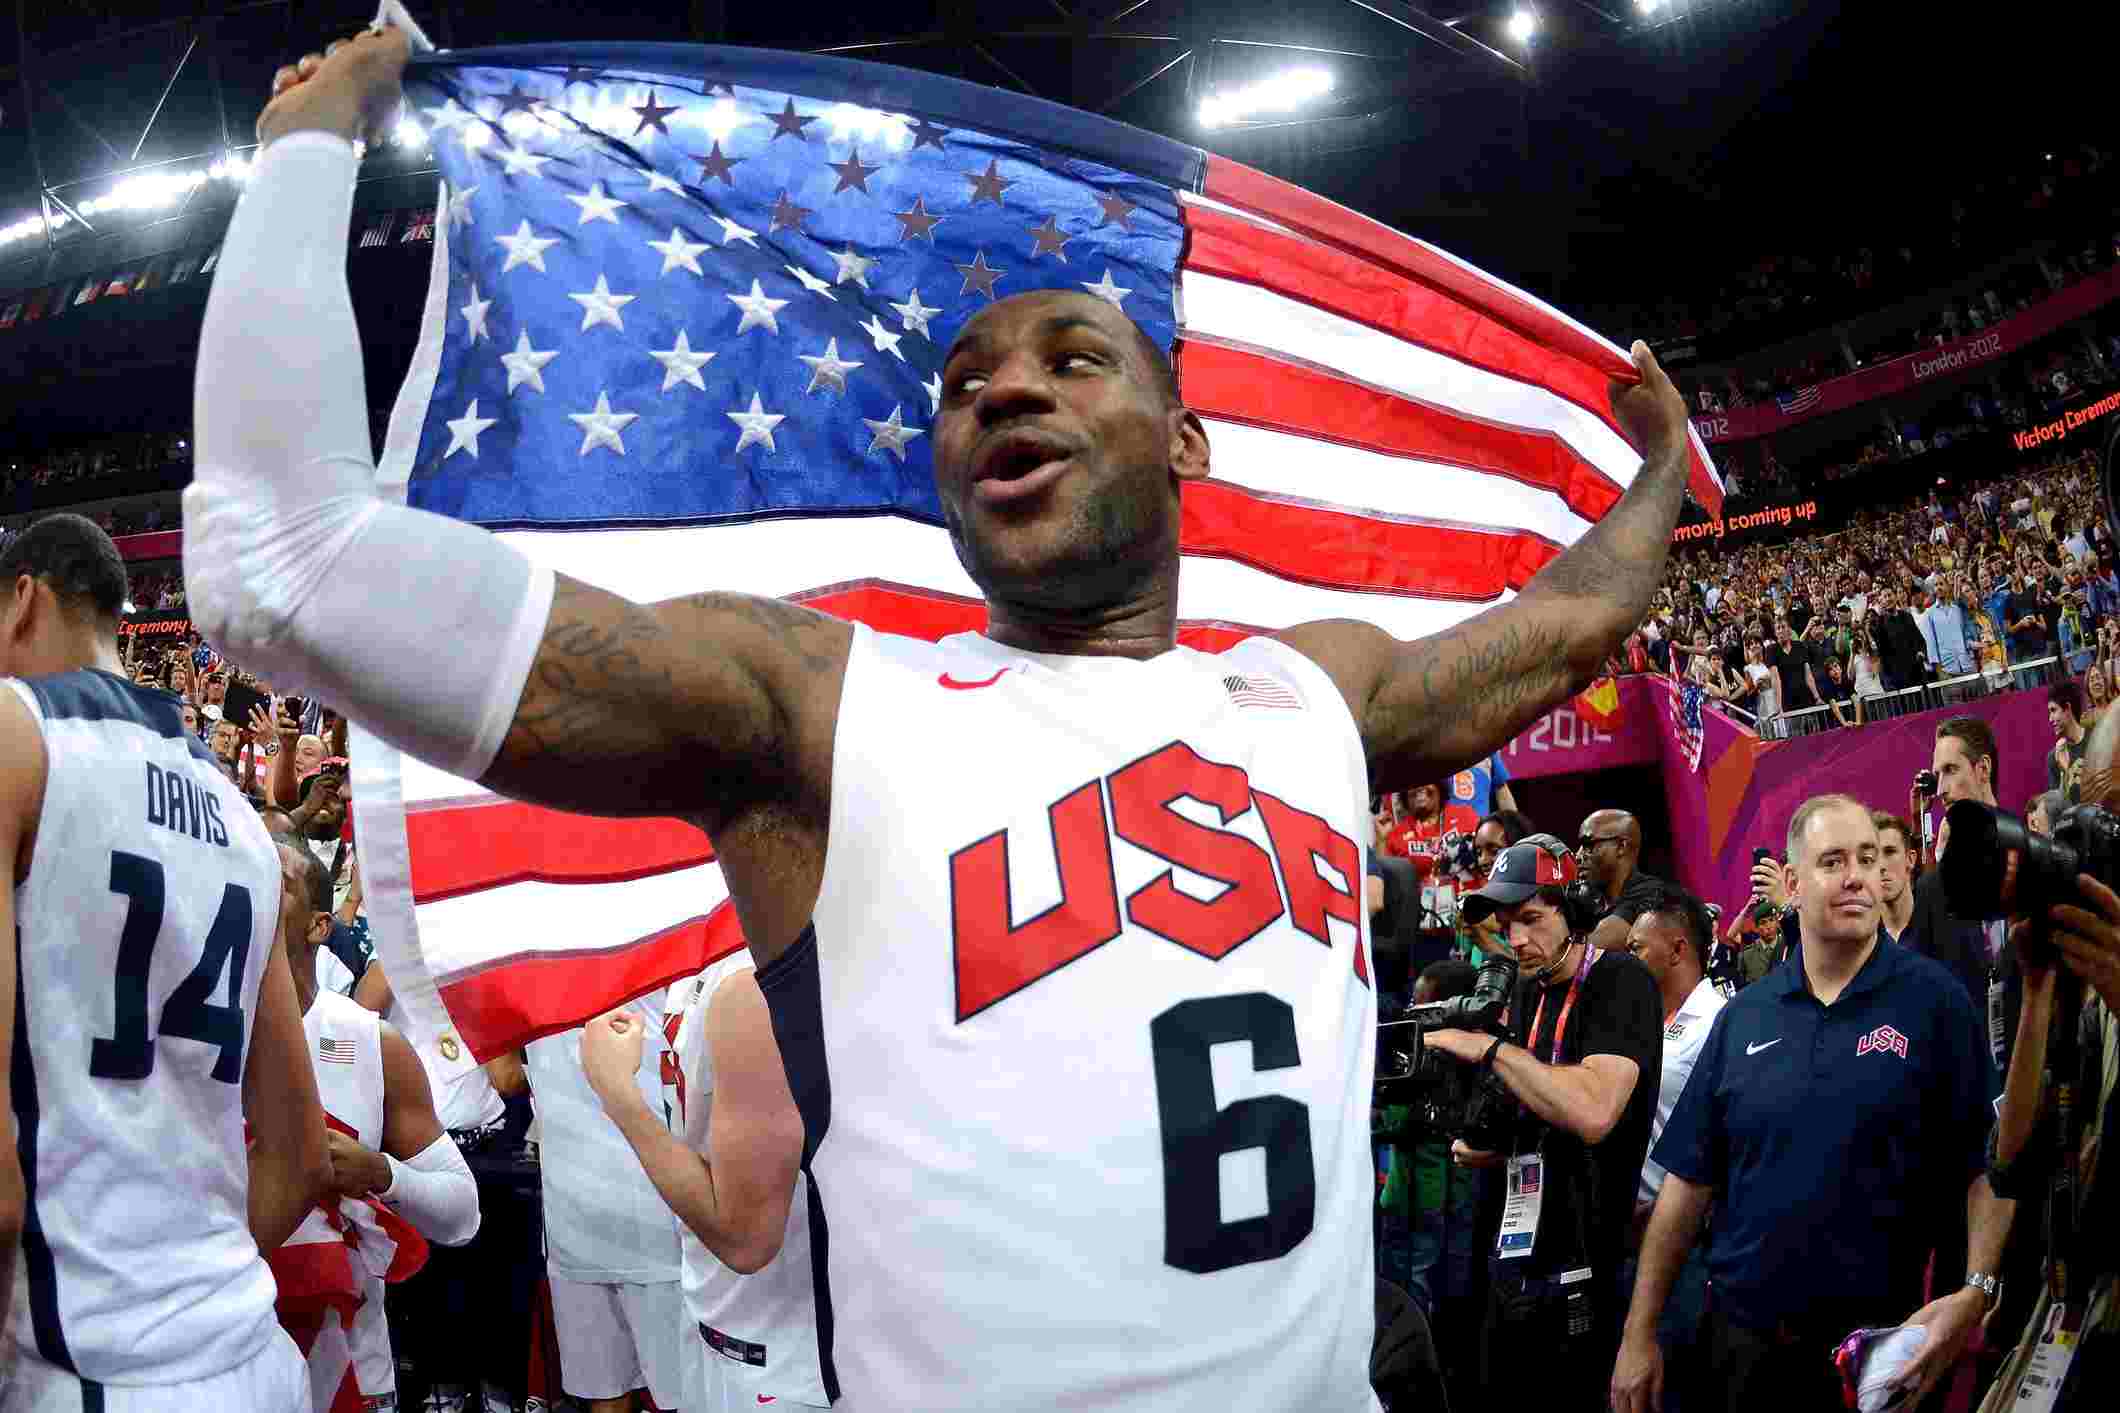 Former gold medalist with Team USA, Lakers ace LeBron James teases fans